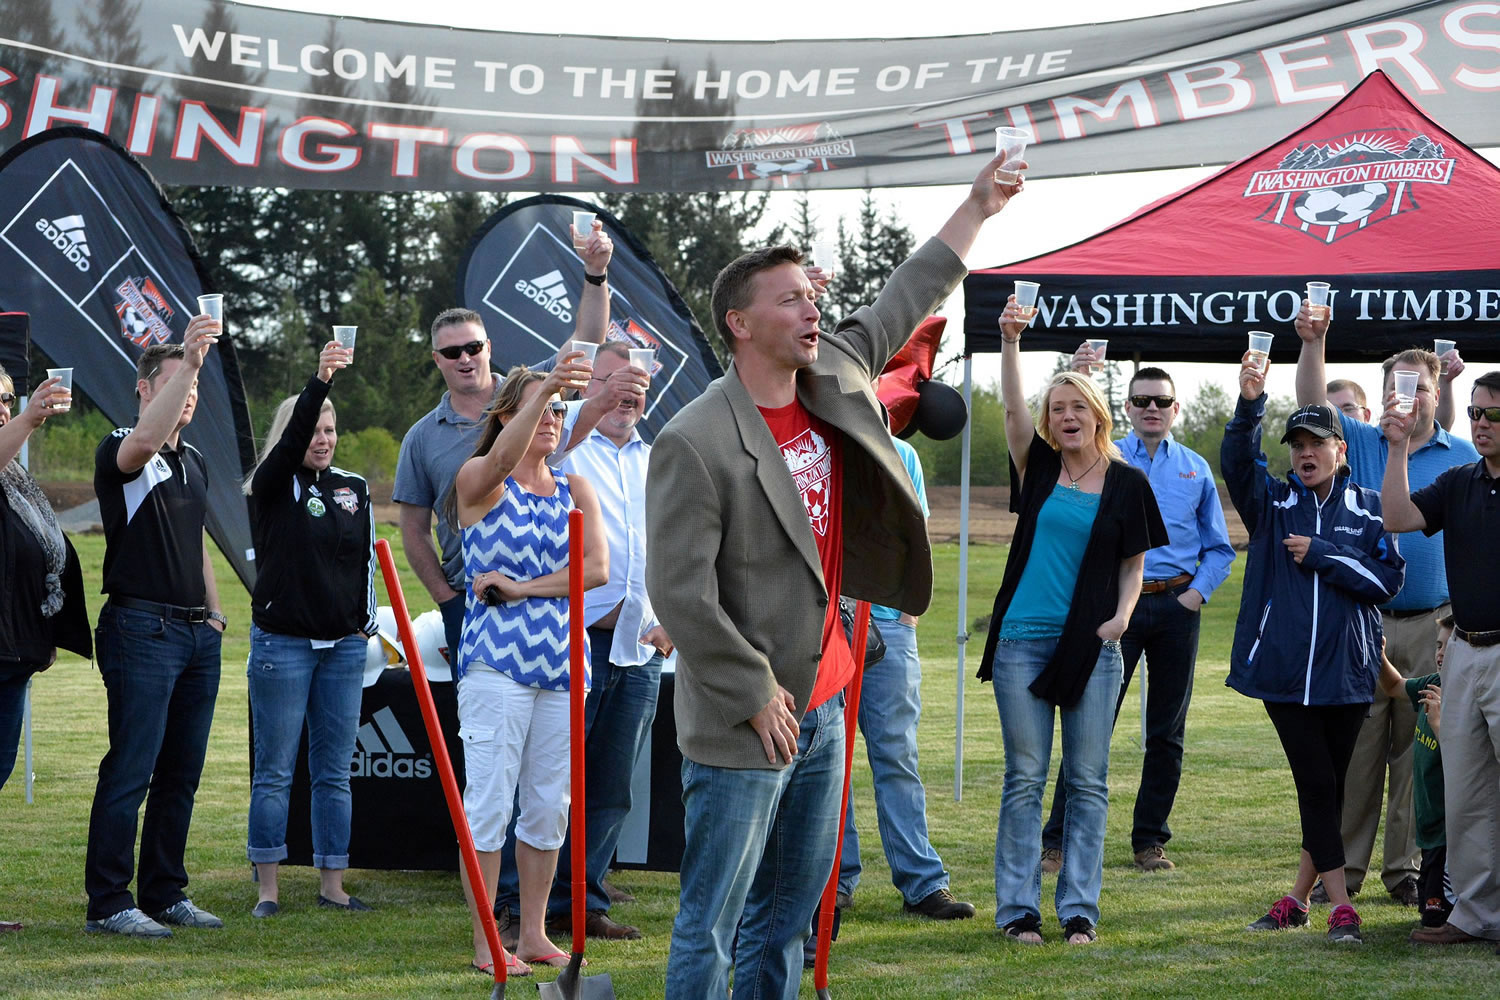 Sean Janson, executive director of Washington Timbers FC, toasts to the start of construction of two artificial turf fields at the Harmony Sports Complex. The club marked the start of construction with a celebration on Friday.